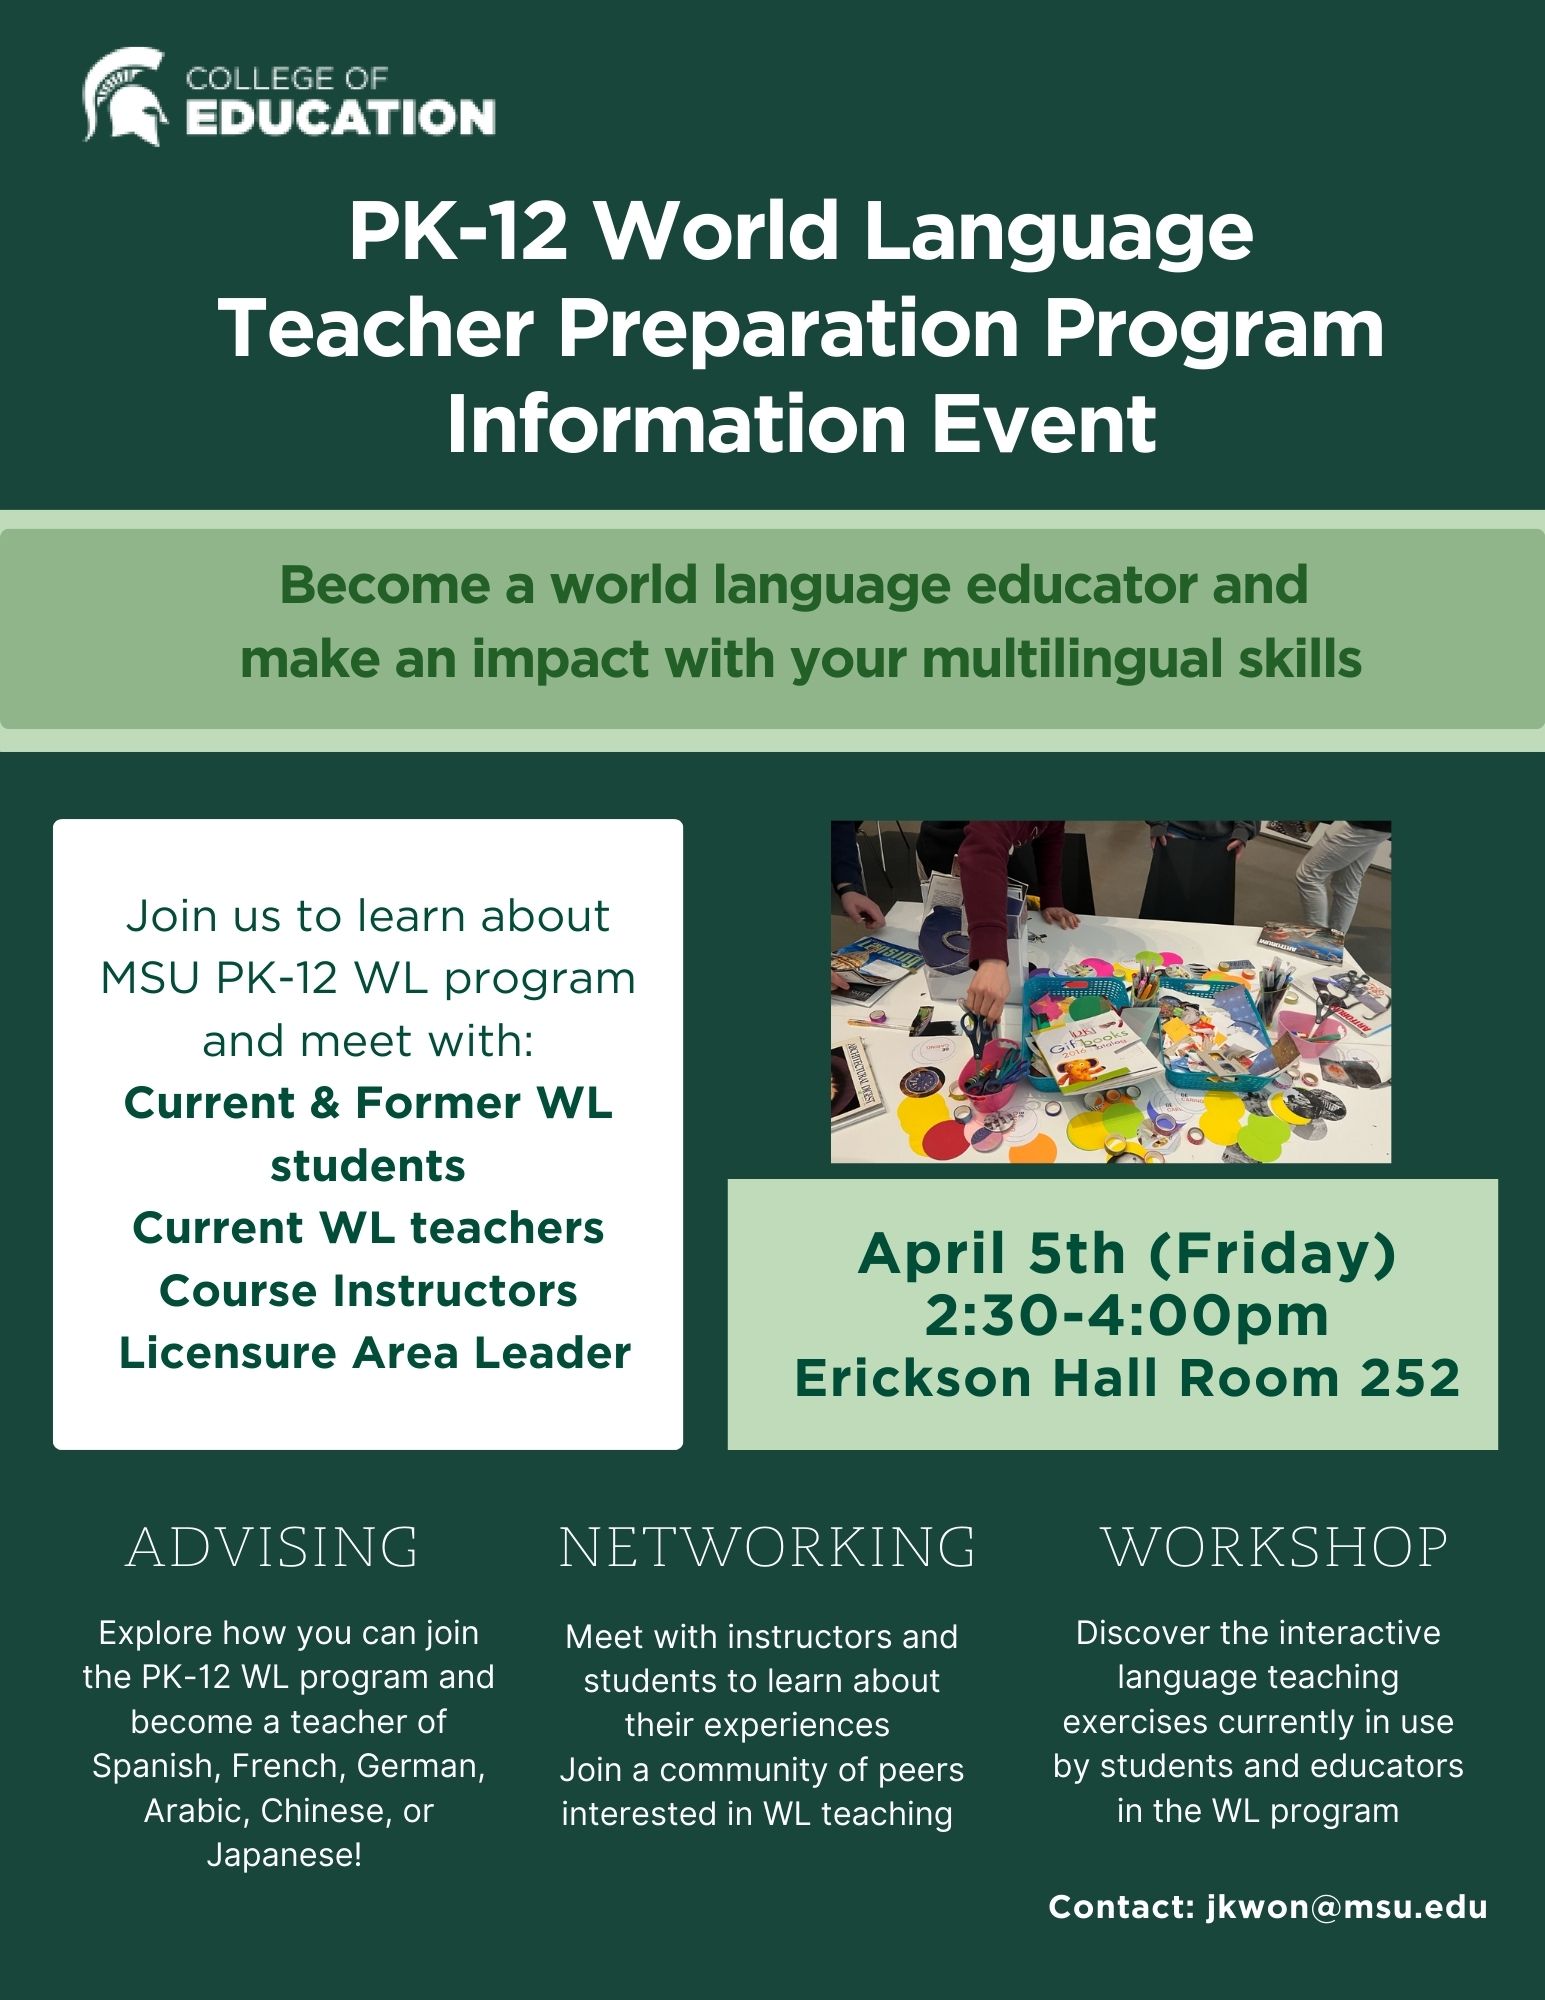 PK-12 World Language Teacher Preparation Program Informational Event. Become a world language educator and make an impact with your multilingual skills.